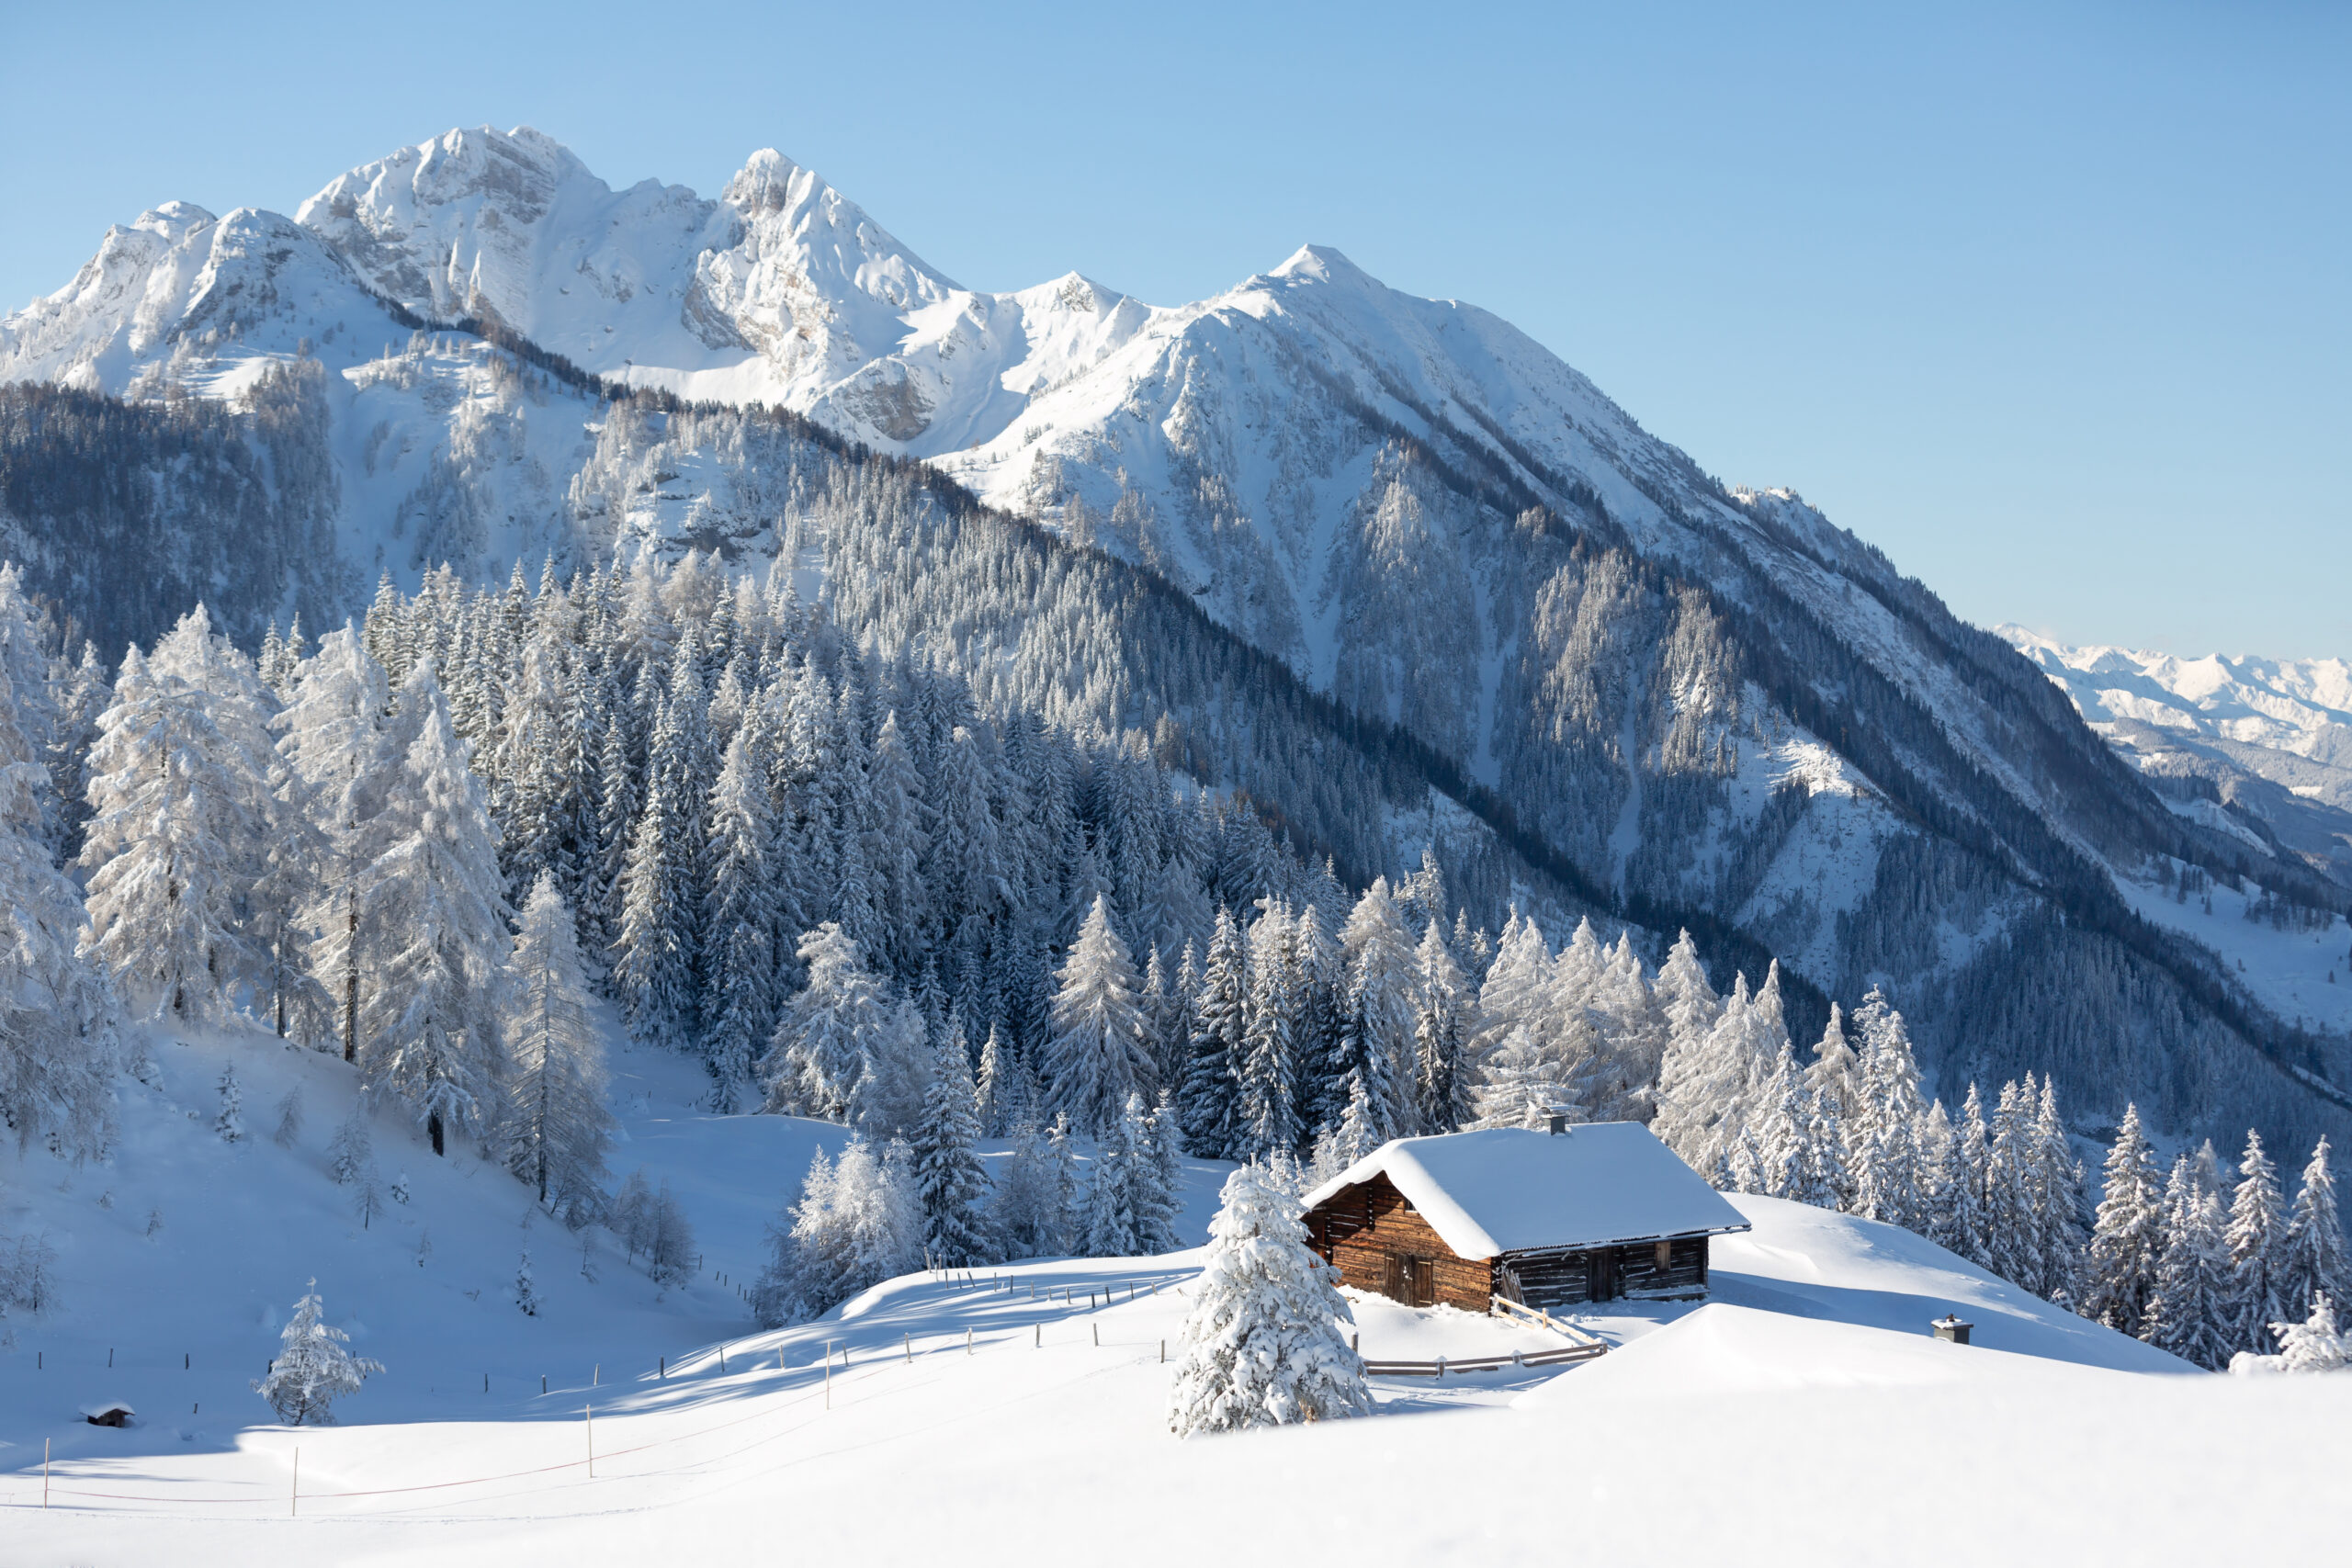 Winter wonderland in Alps. Picturesque winter scene with small chalet.